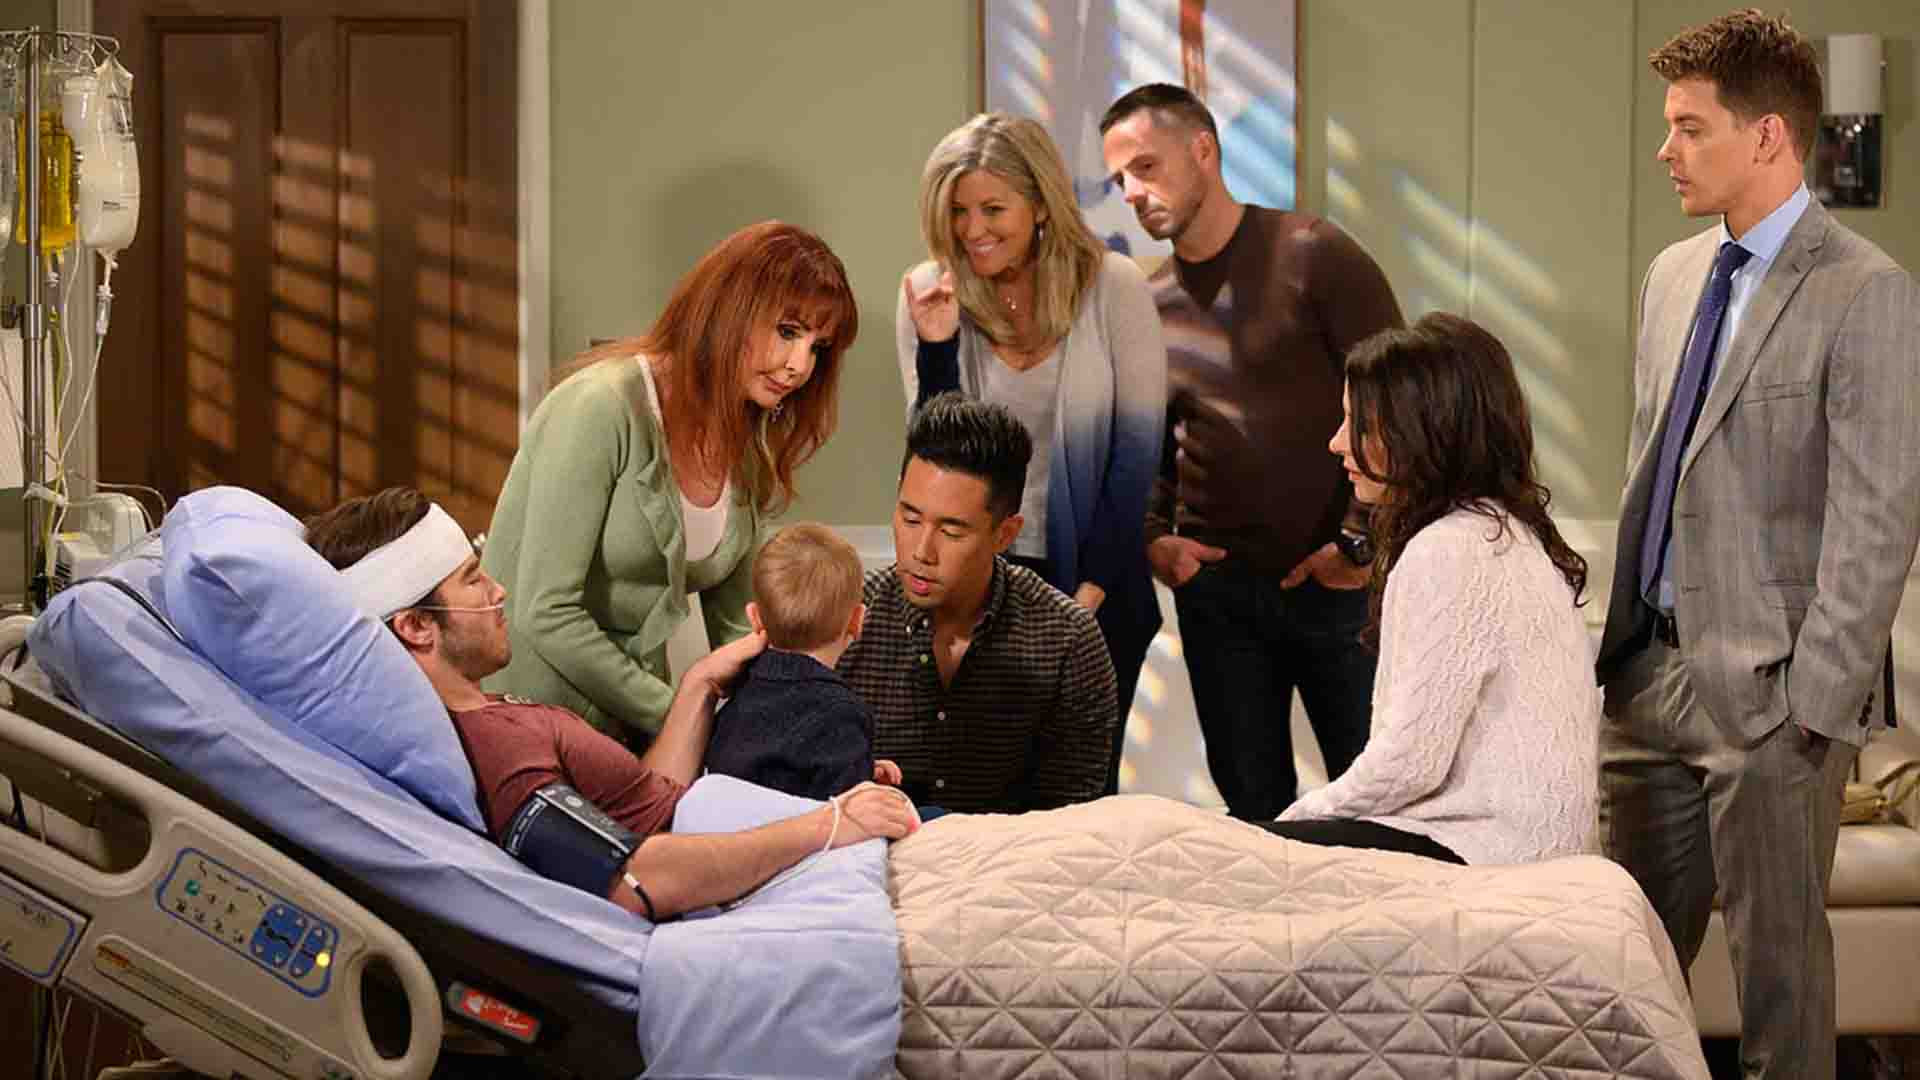 General Hospital characters visiting a patient